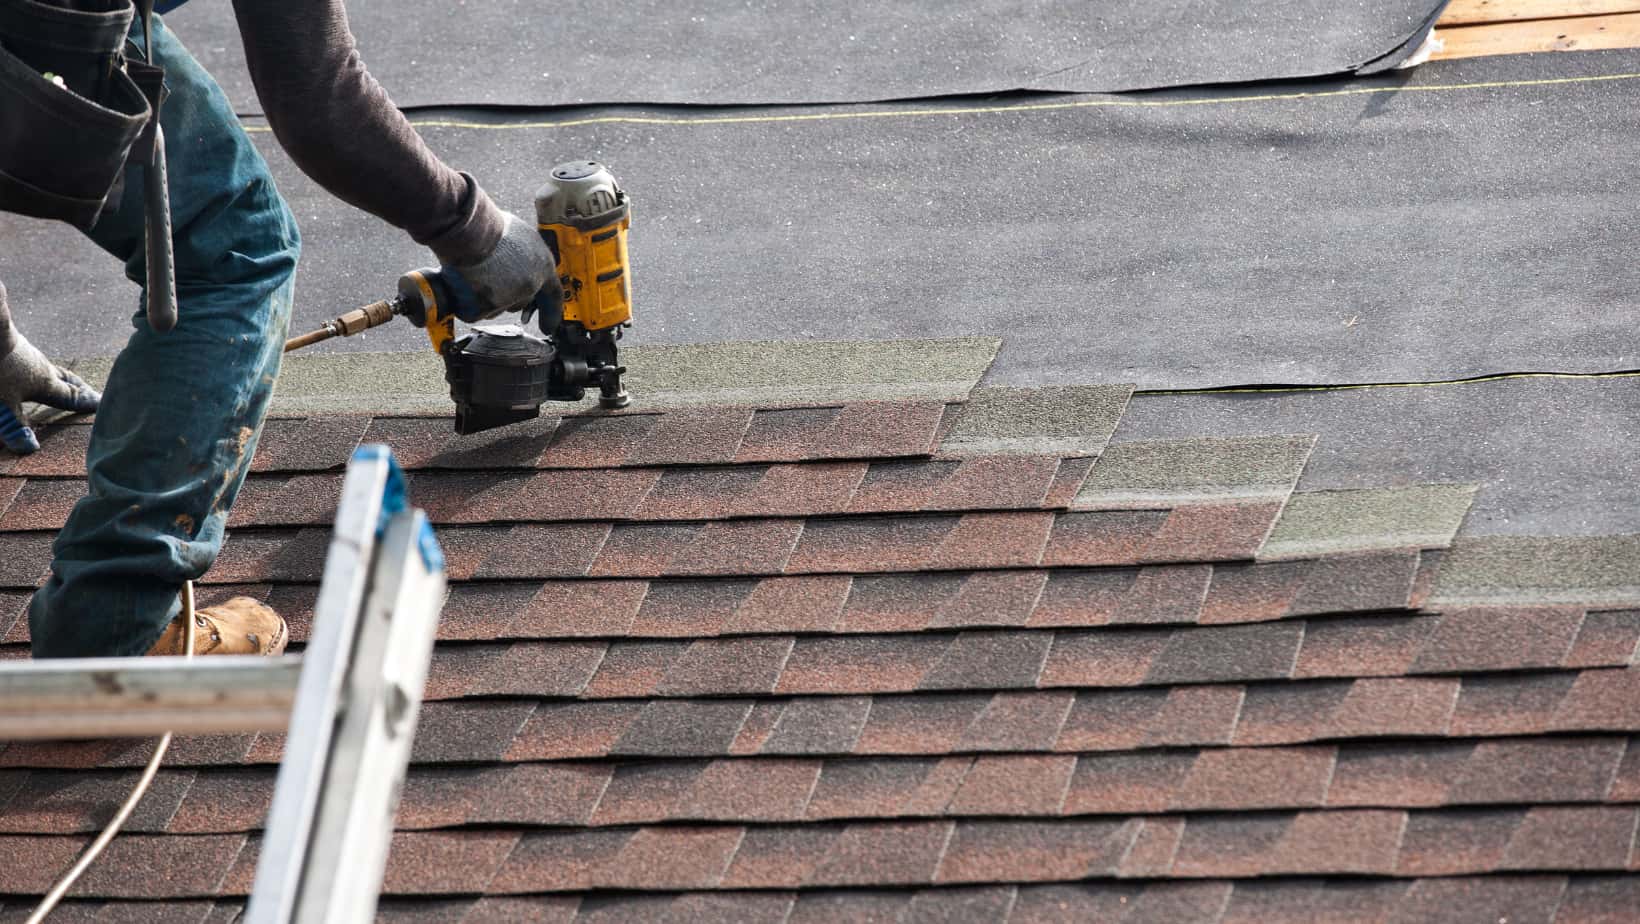 RESIDENTIAL ROOFING